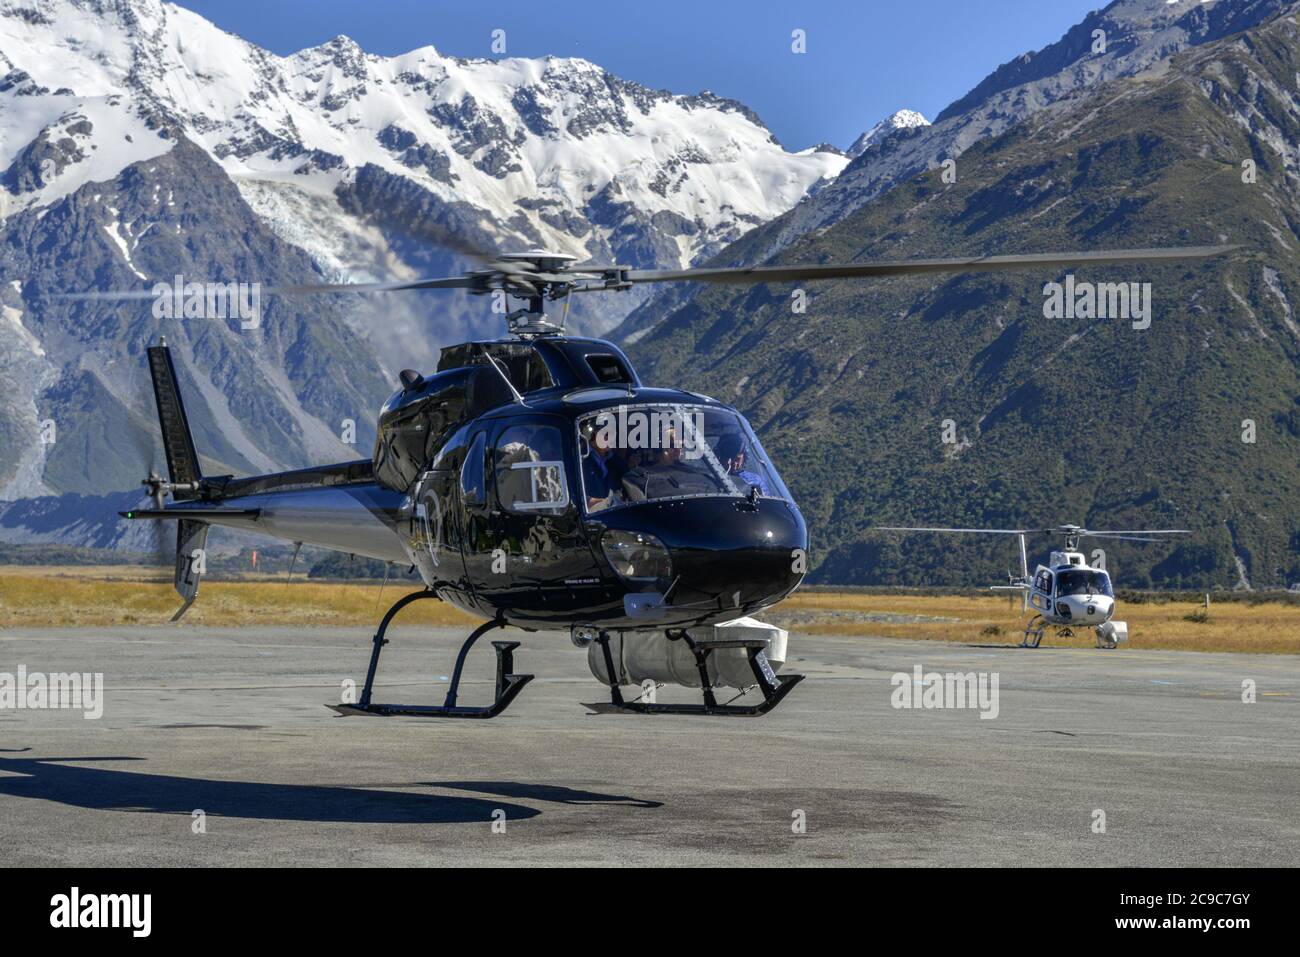 A Eurocopter AS350 Squirrel helicopter at work in an alpine setting Stock Photo